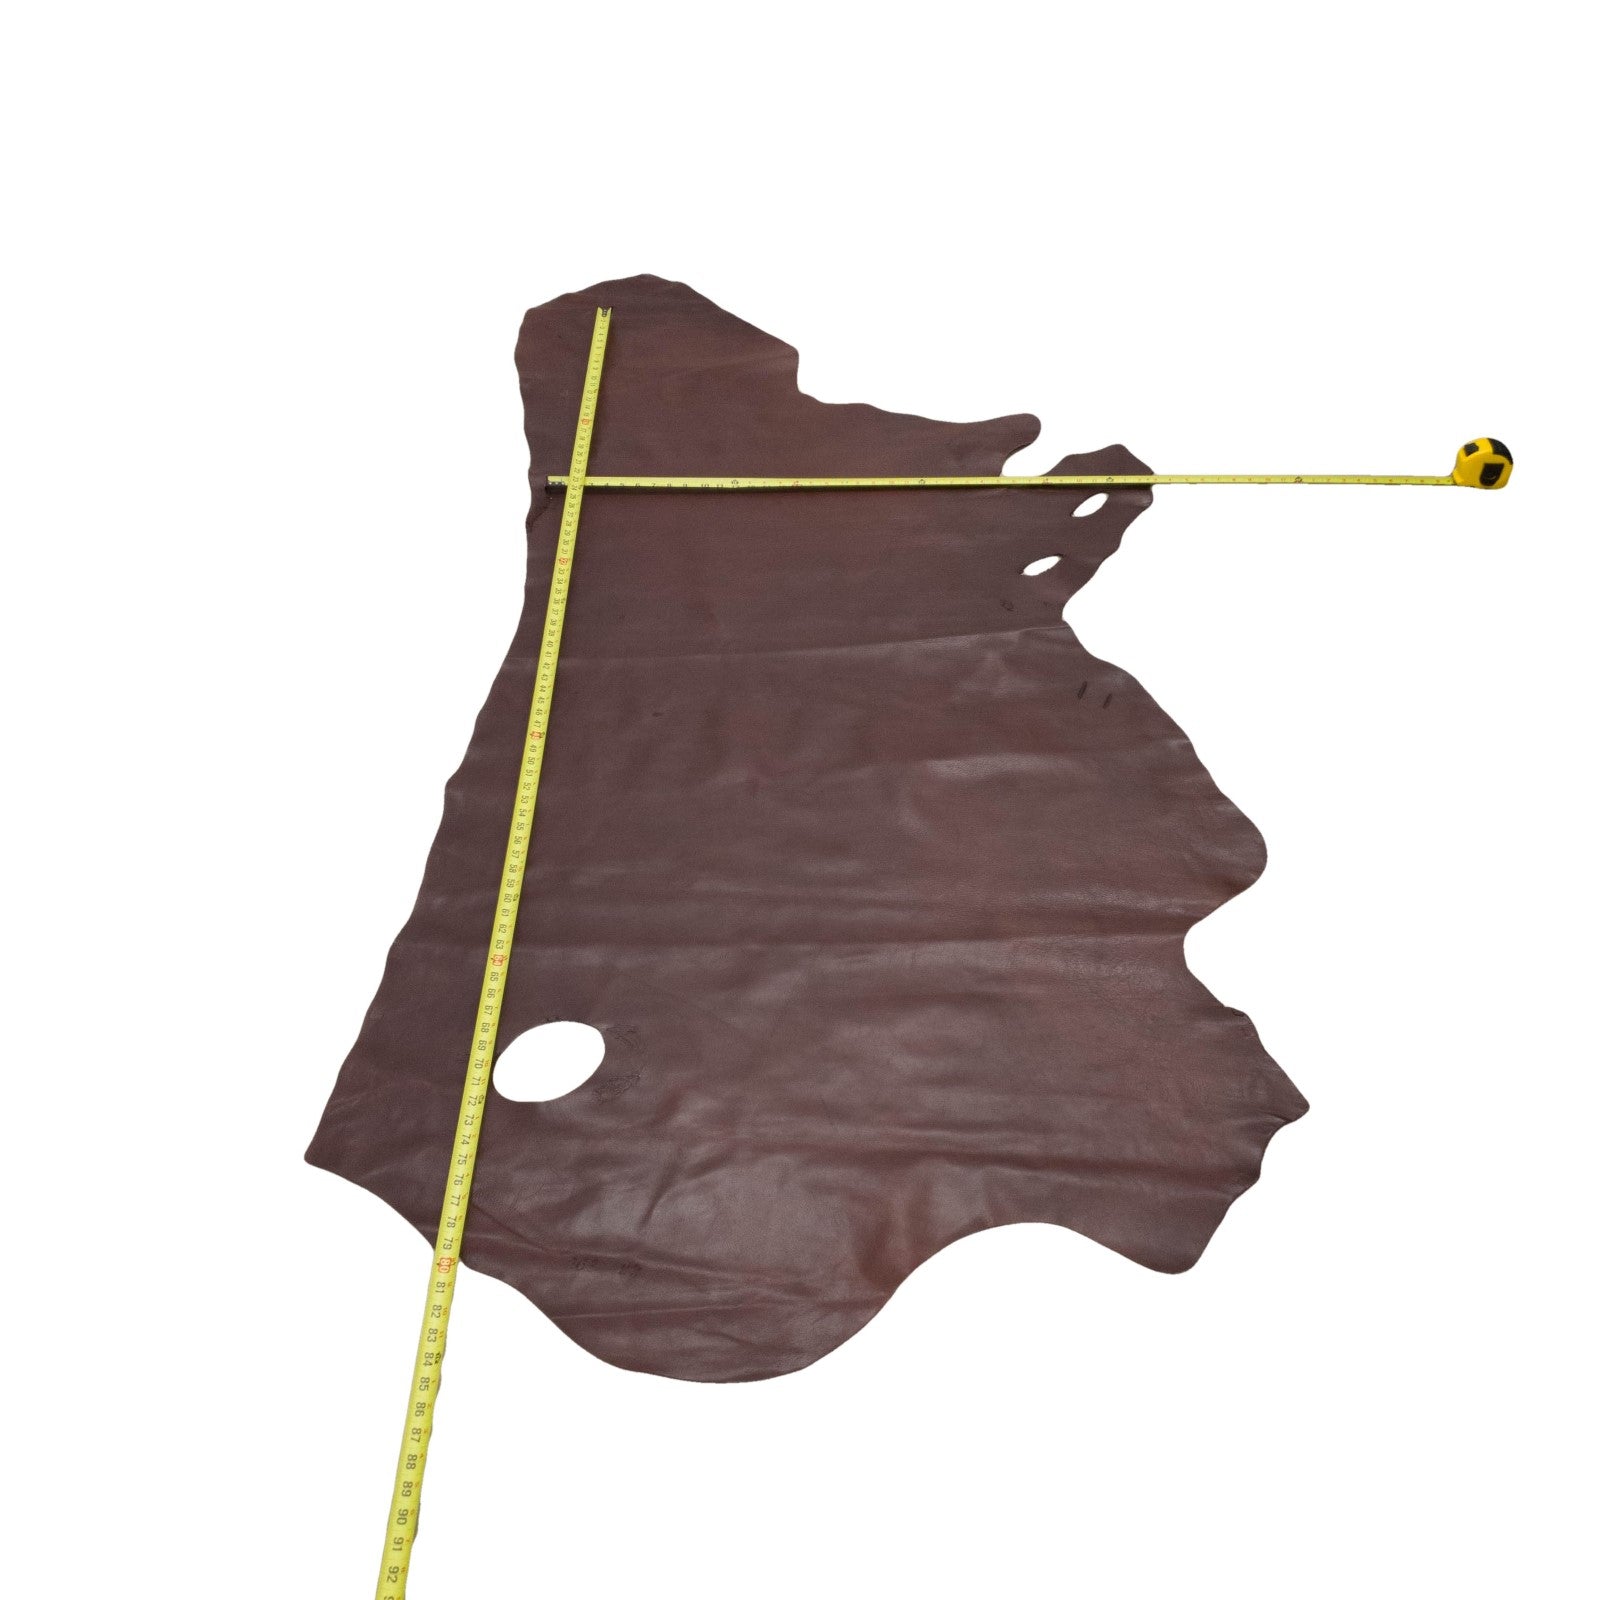 Rustic Burgundy Brown, 3-4 oz, 18-20 Sq Ft, Chap Cow Side,  | The Leather Guy